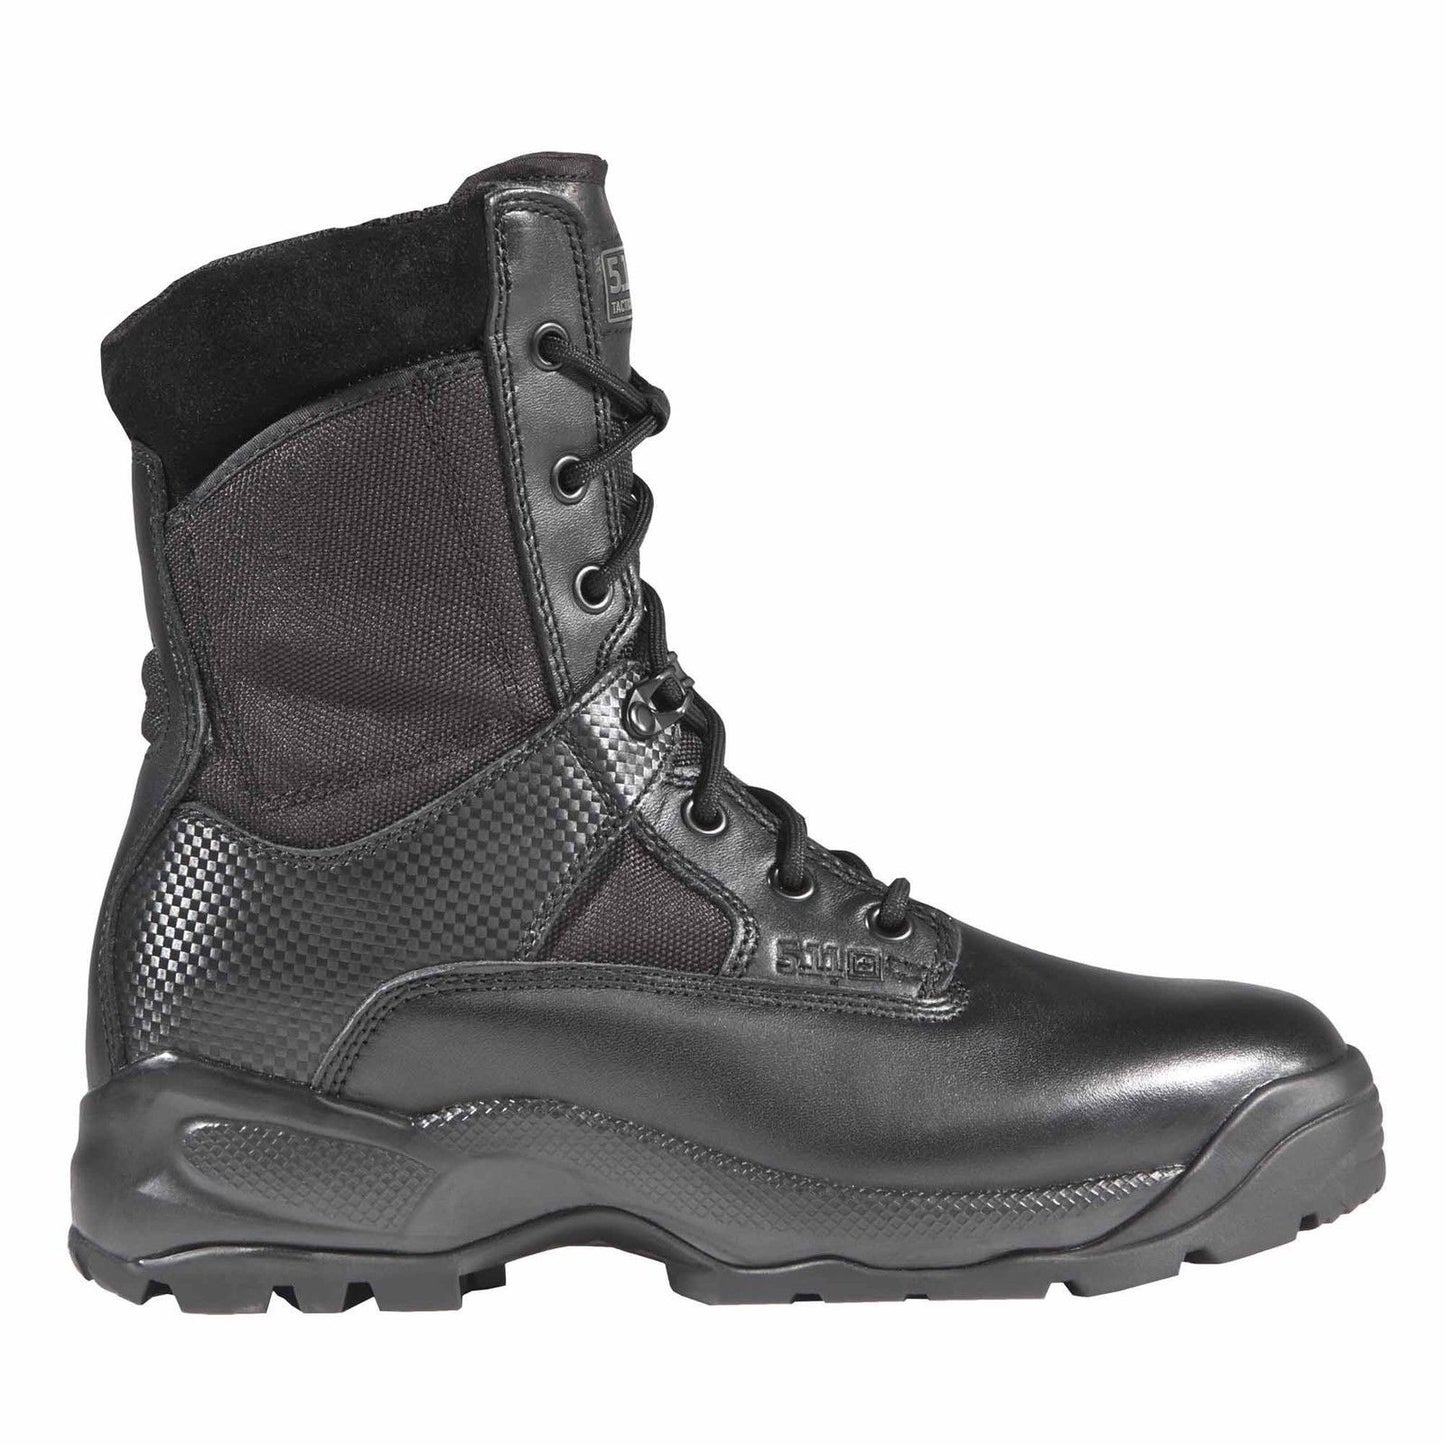 5.11 Black 8" ATAC Side Zip Boots - Mens Tactical Operator Field Duty Work Boot